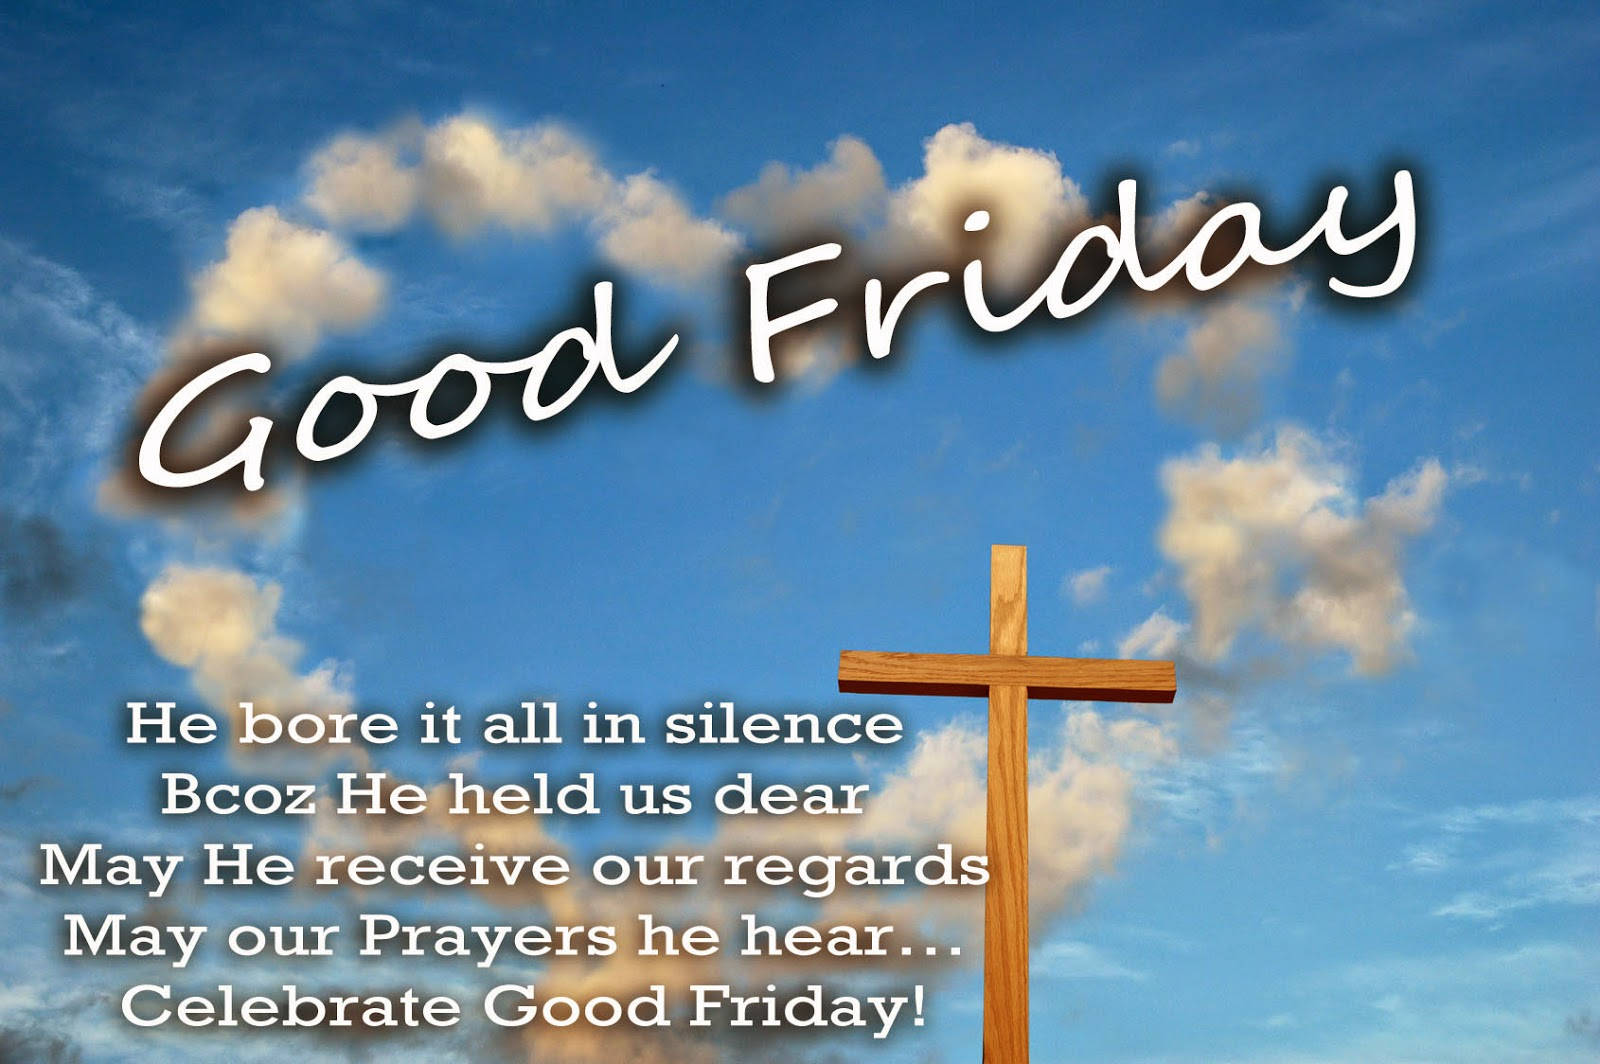 Good Friday Greetings Background